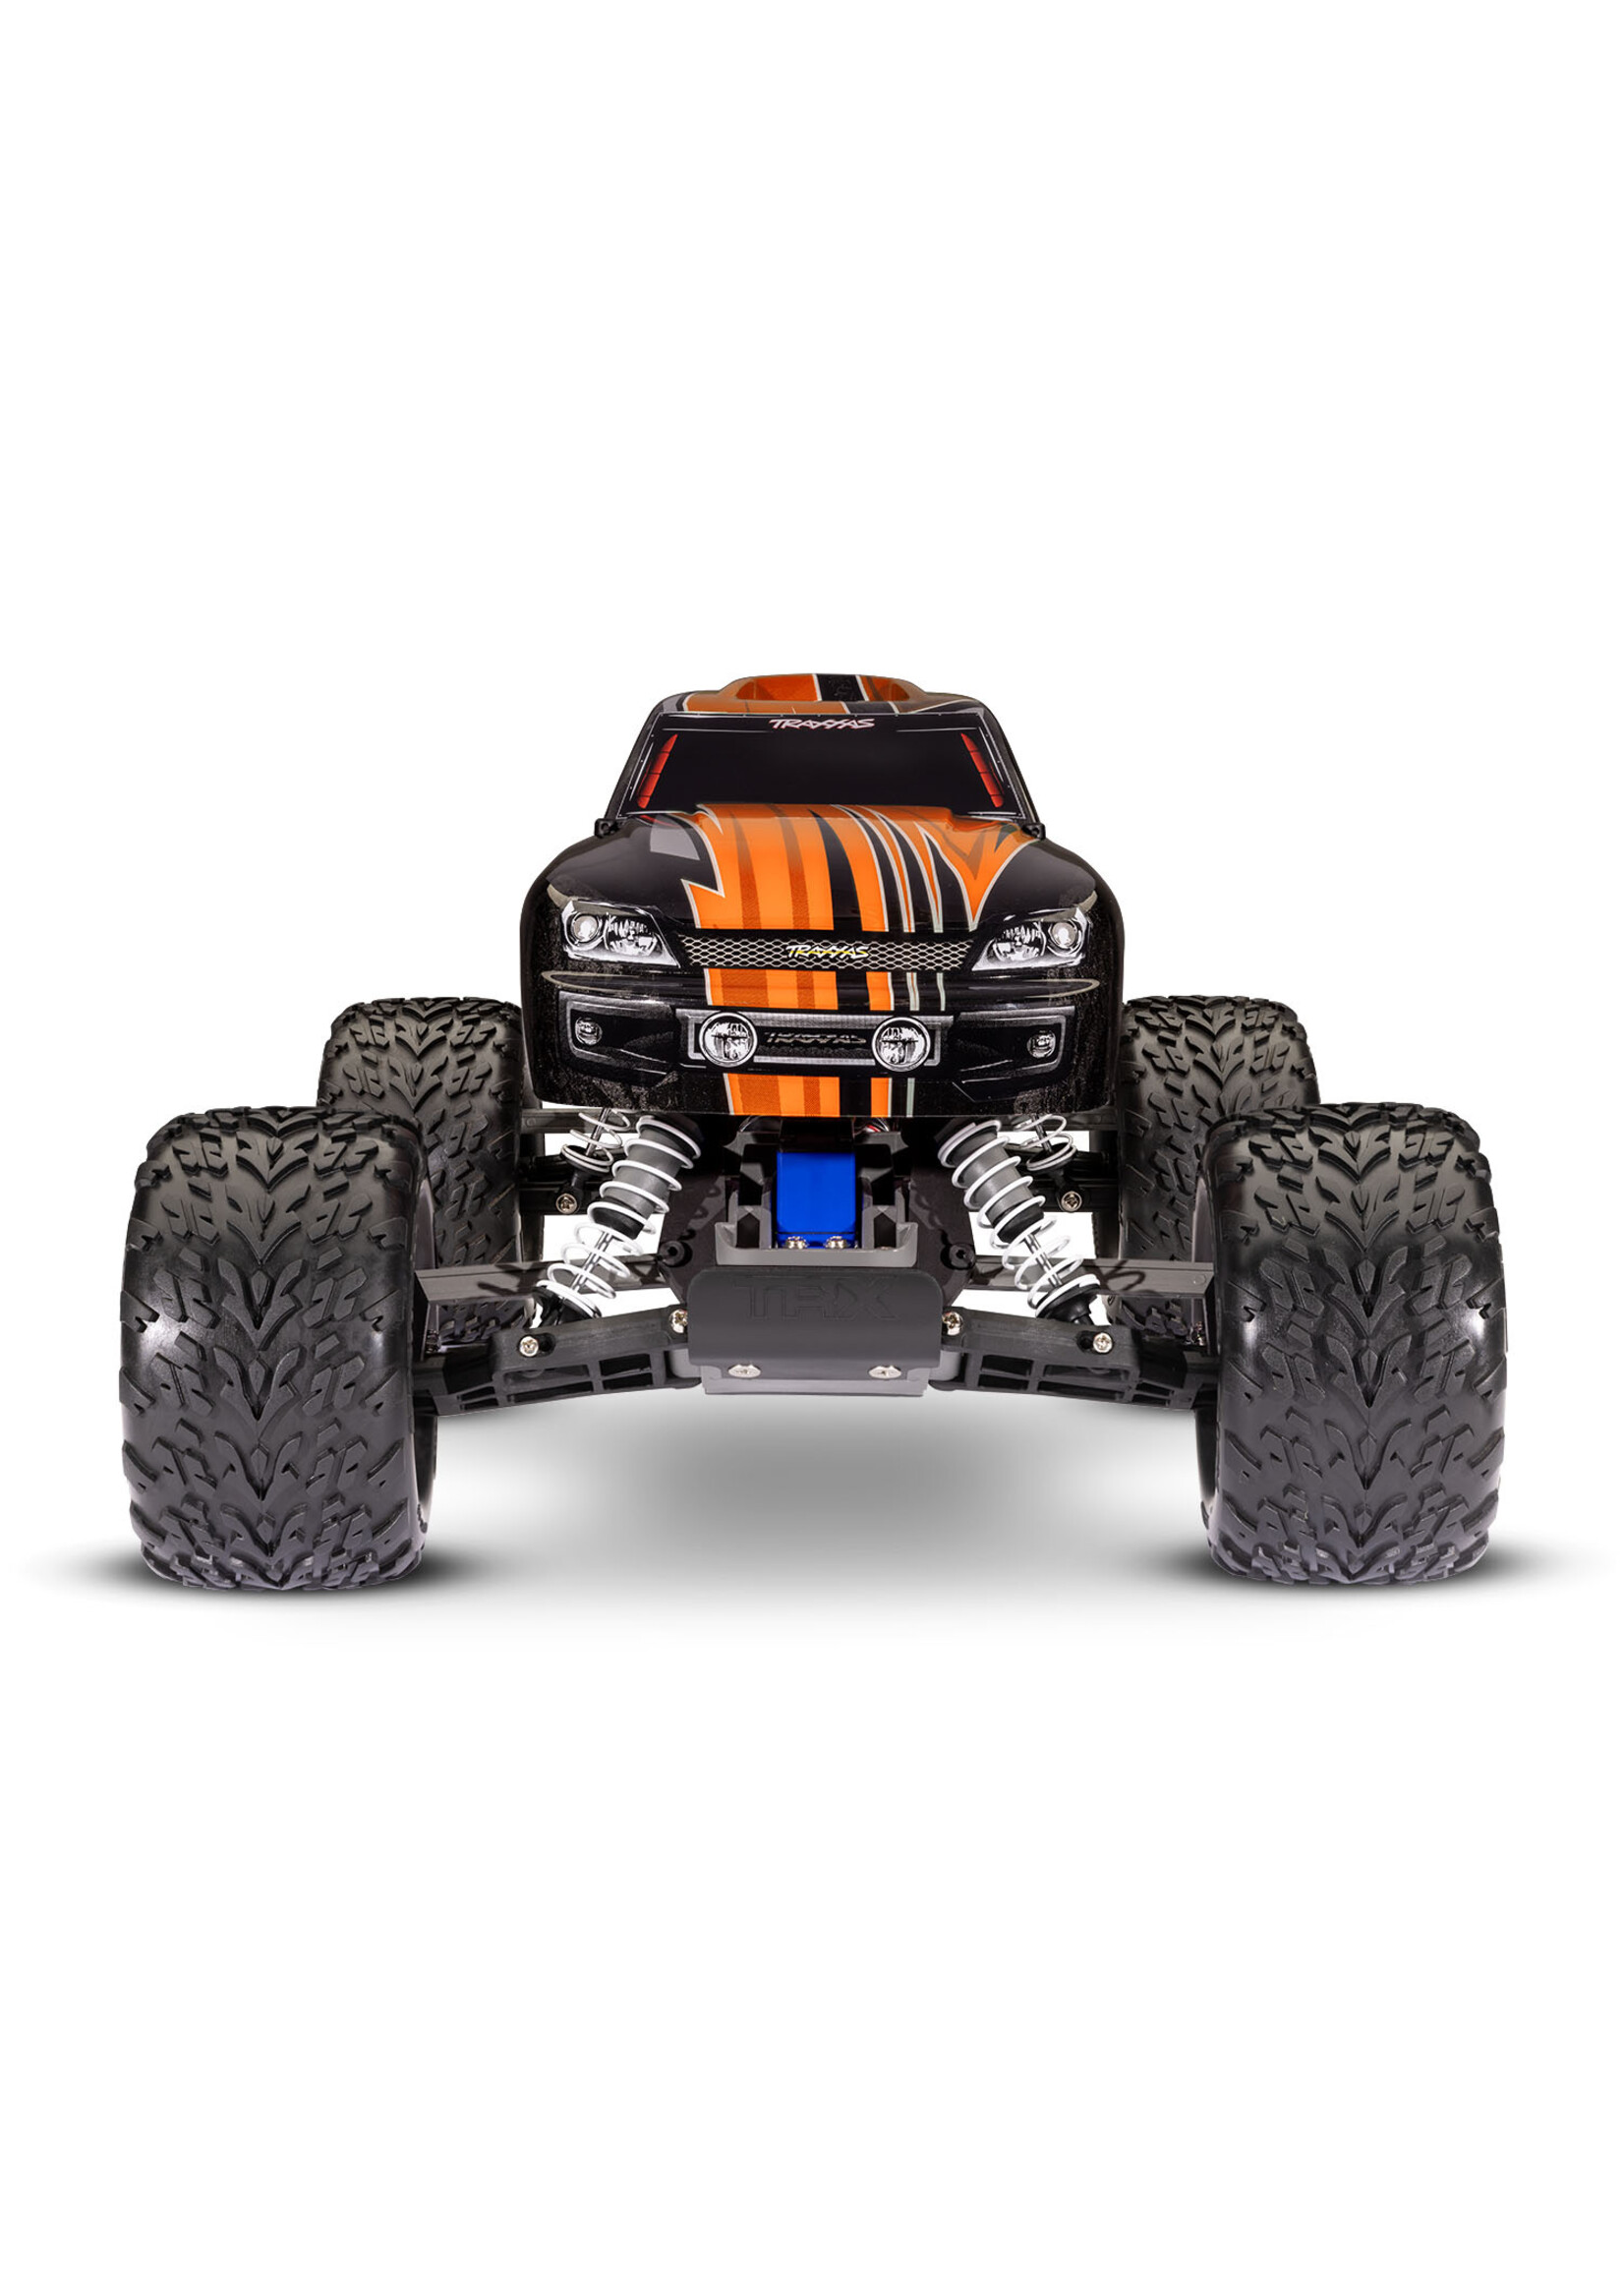 Traxxas 1/10 Stampede Monster Truck With USB-C Charger - Orange